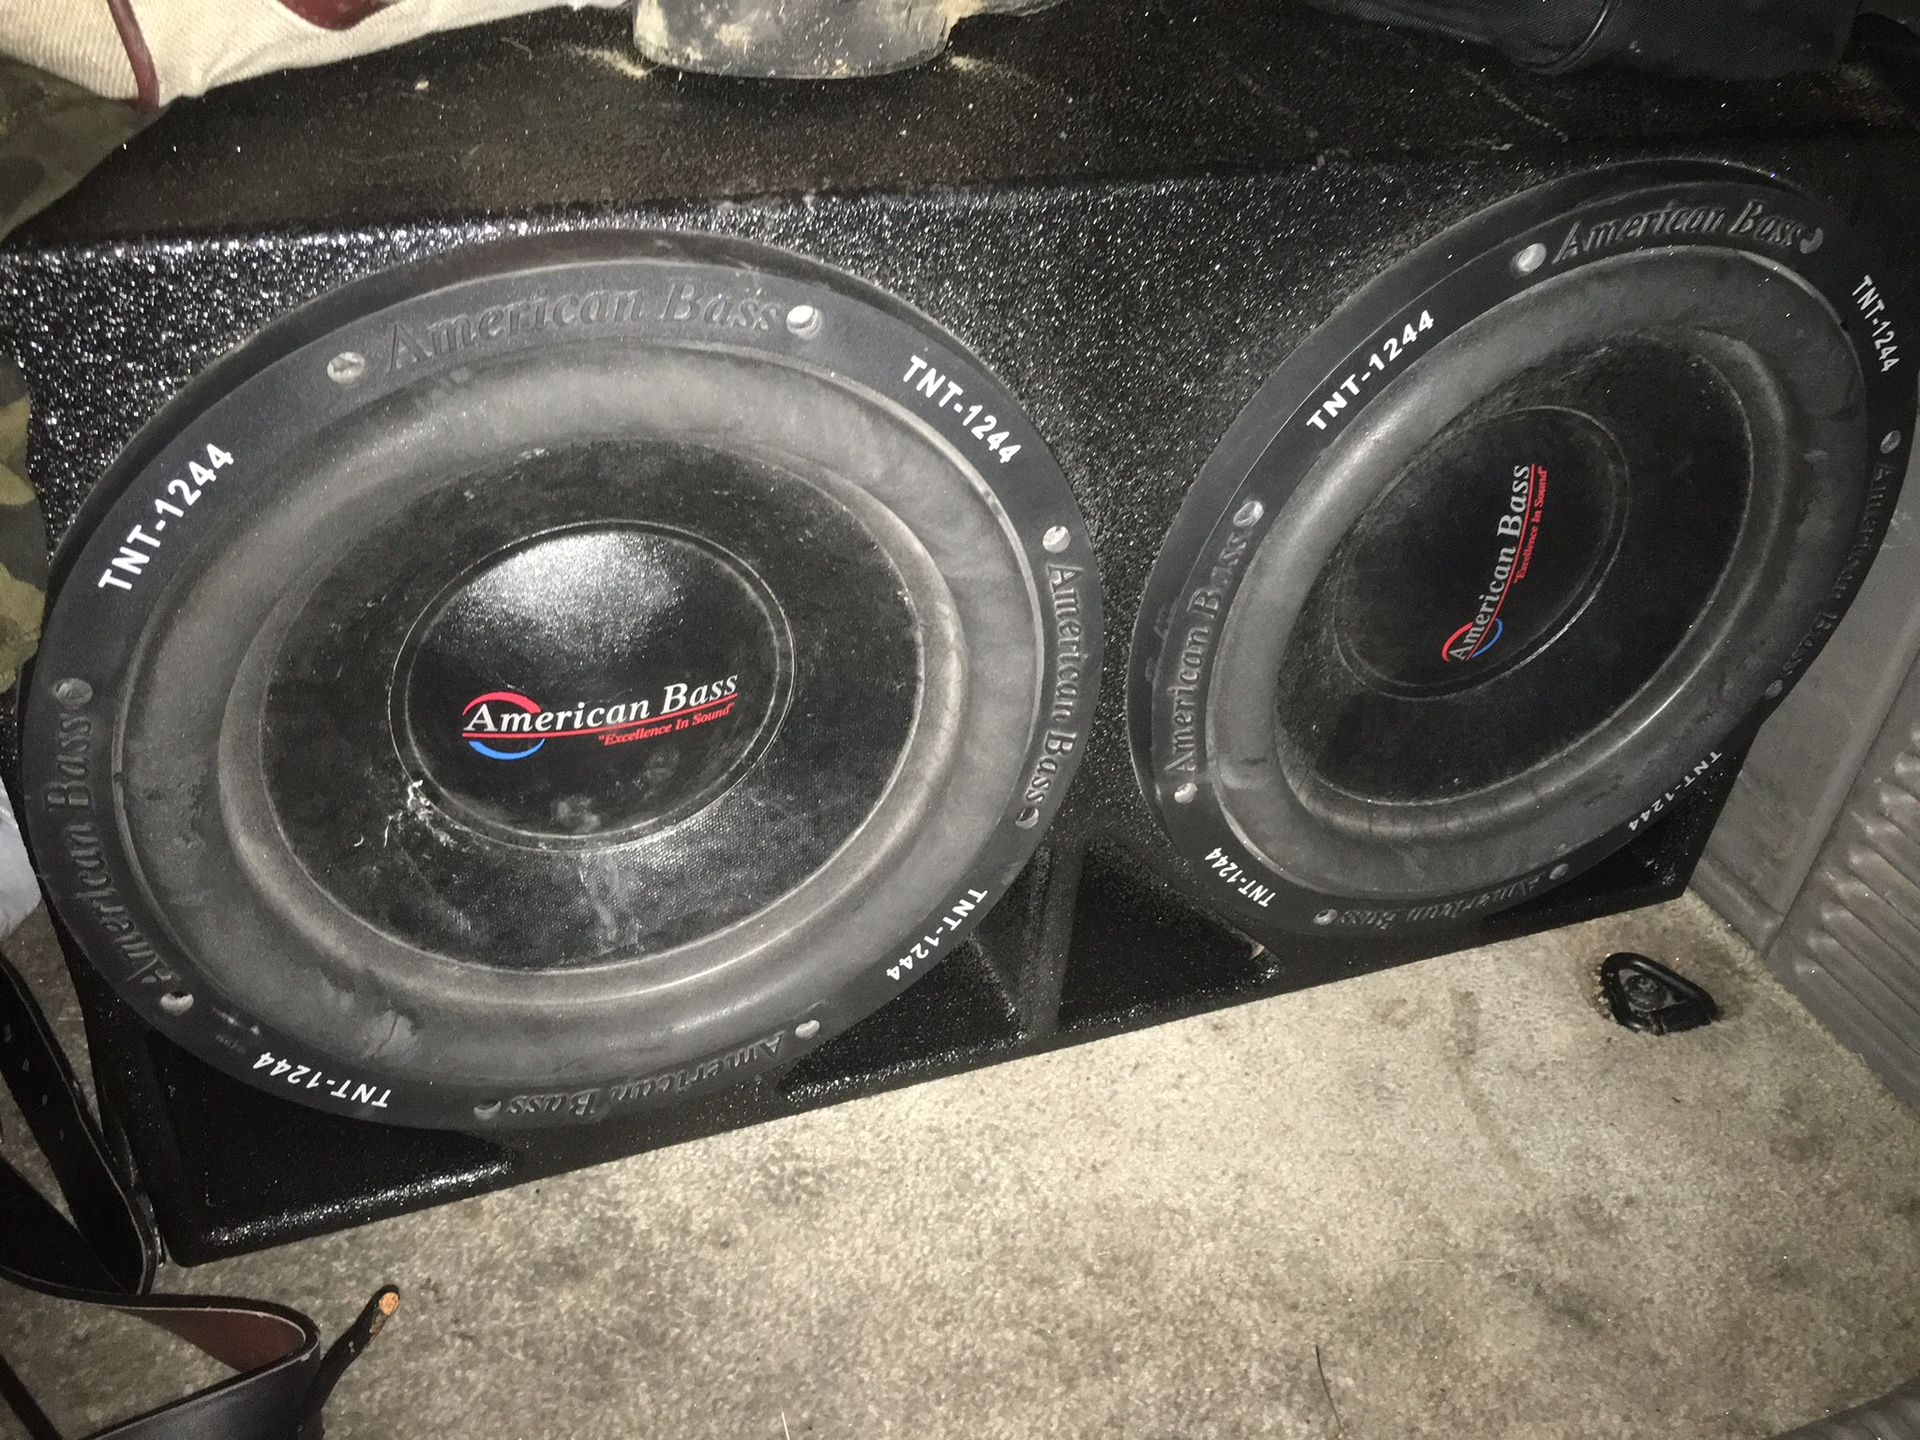 American bass 12 inch subwoofers